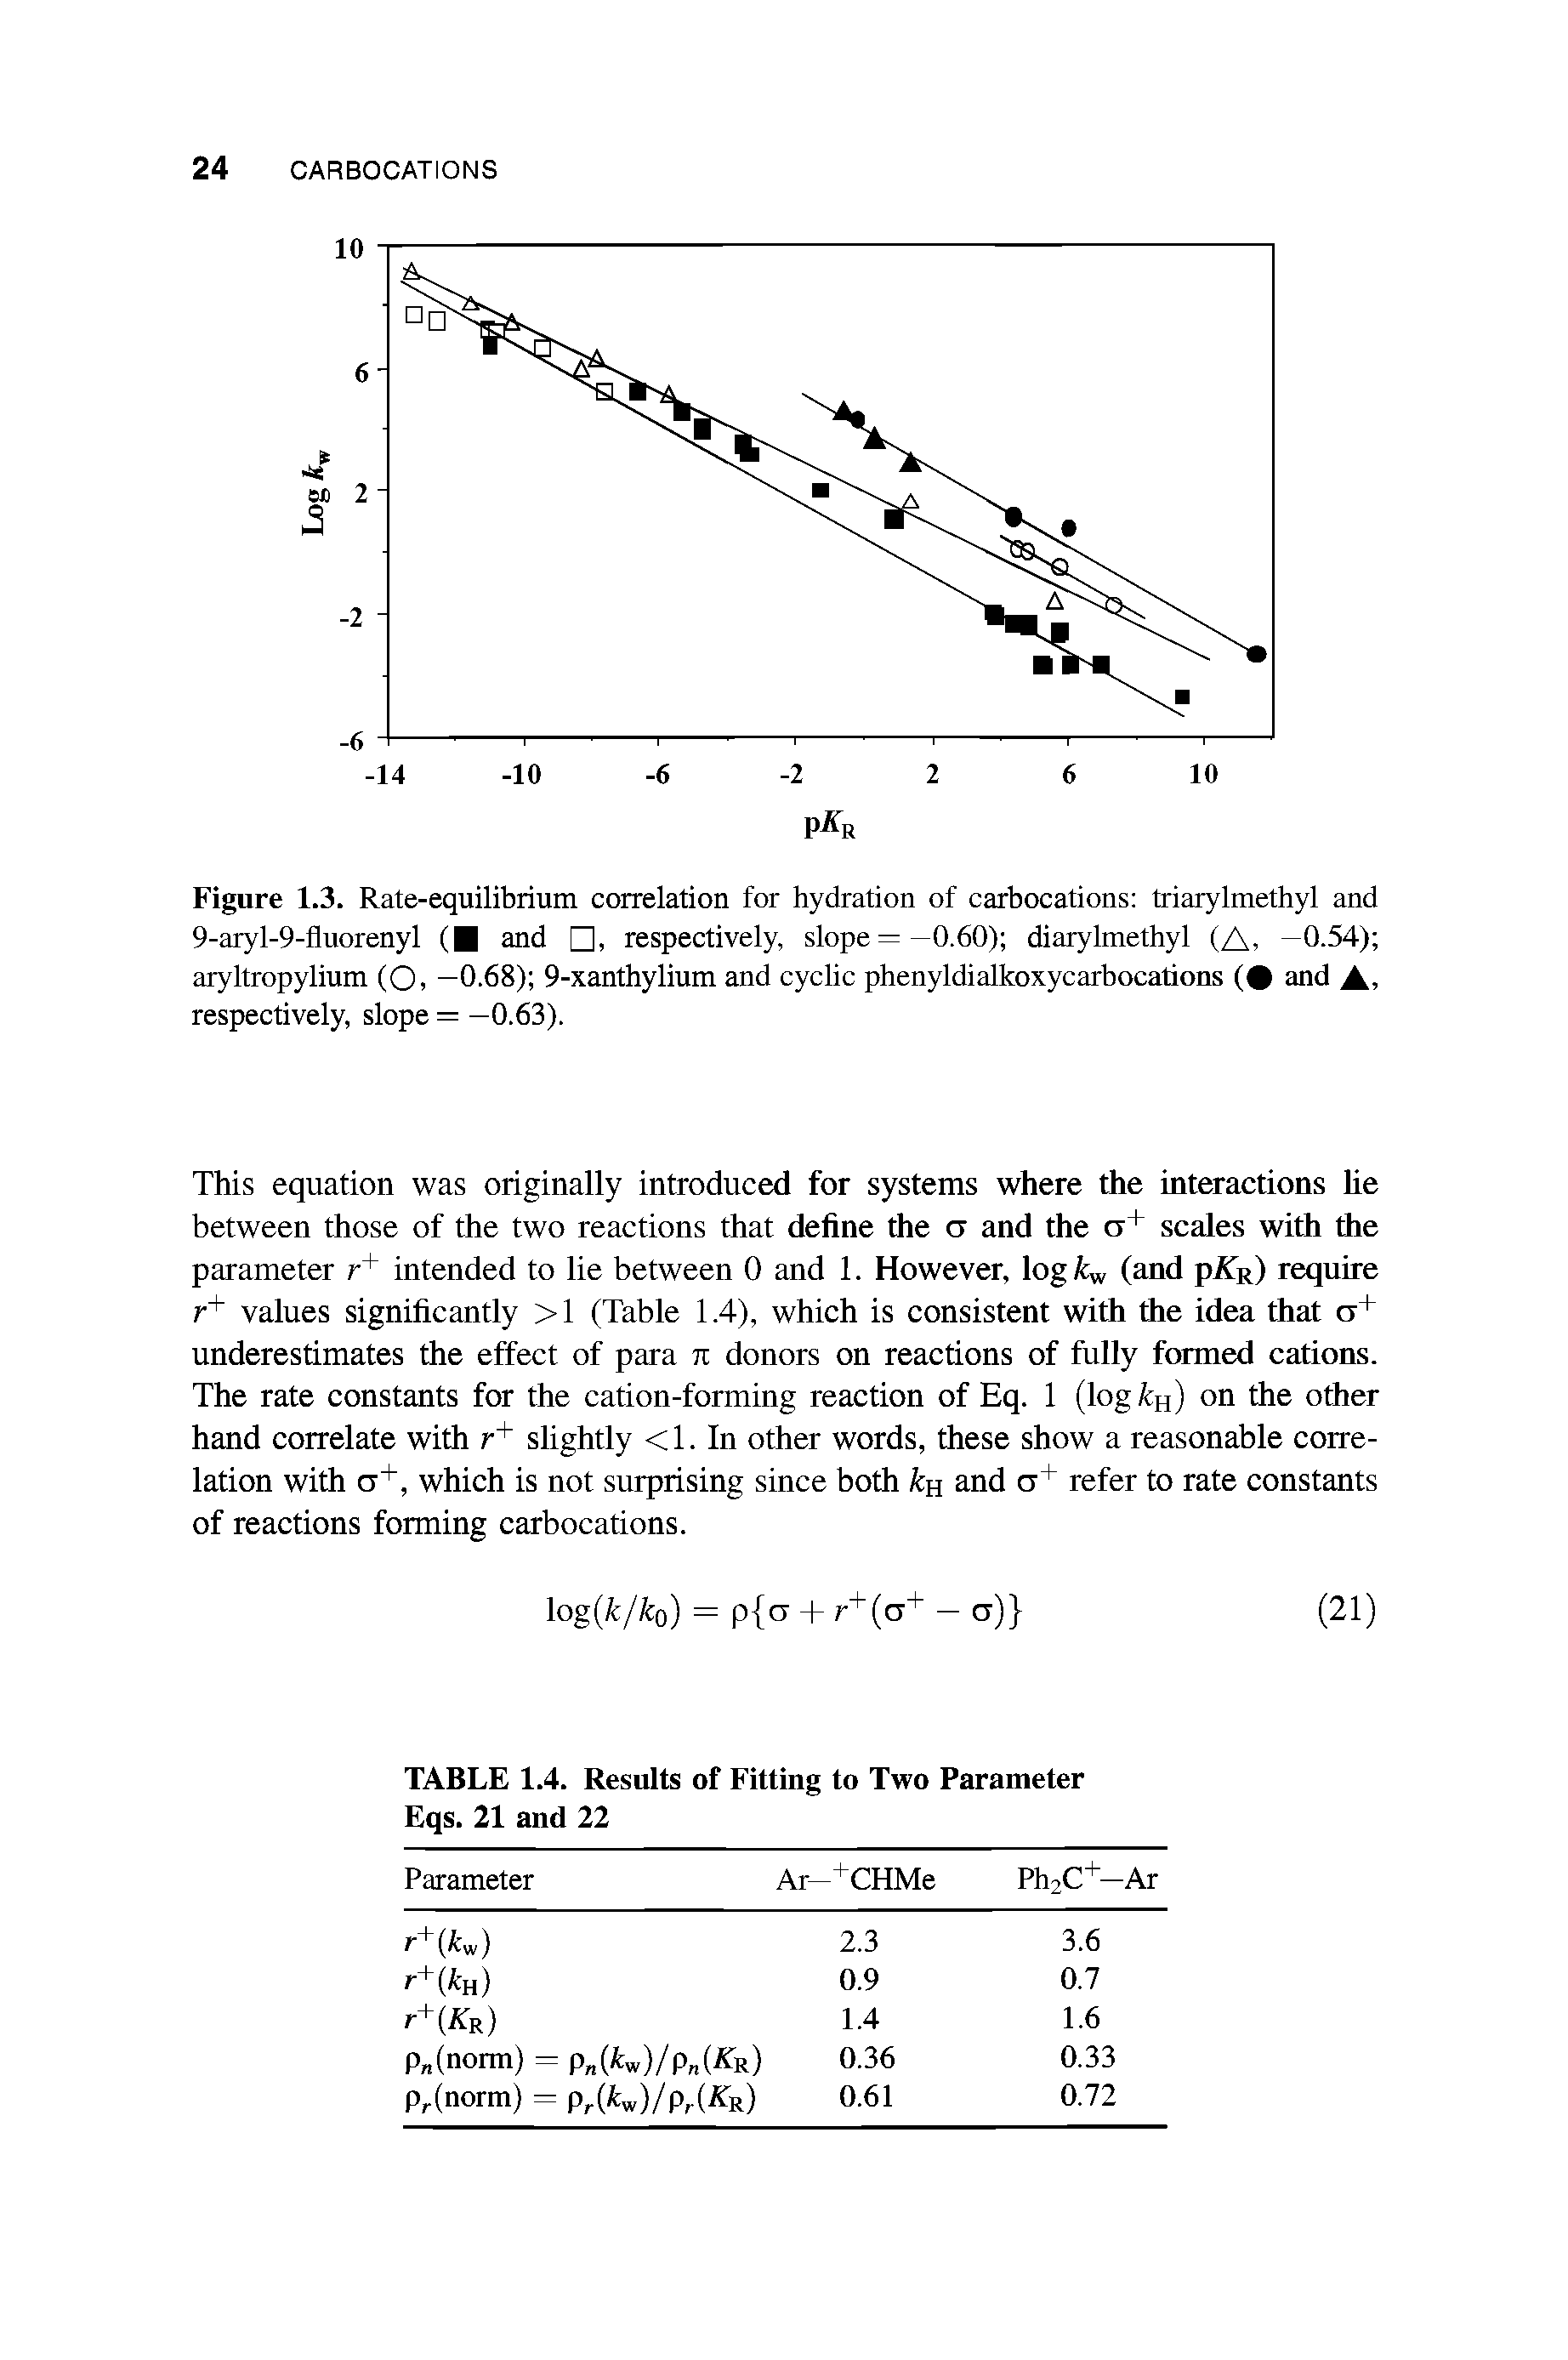 Figure 1.3. Rate-equilibrium correlation for hydration of carbocations triarylmethyl and 9-aryl-9-fluorenyl ( and , respectively, slope =—0.60) diarylmethyl (A, —0.54) aryltropylium (O, —0.68) 9-xanthylium and cyclic phenyldialkoxycarbocations ( and A, respectively, slope = —0.63).